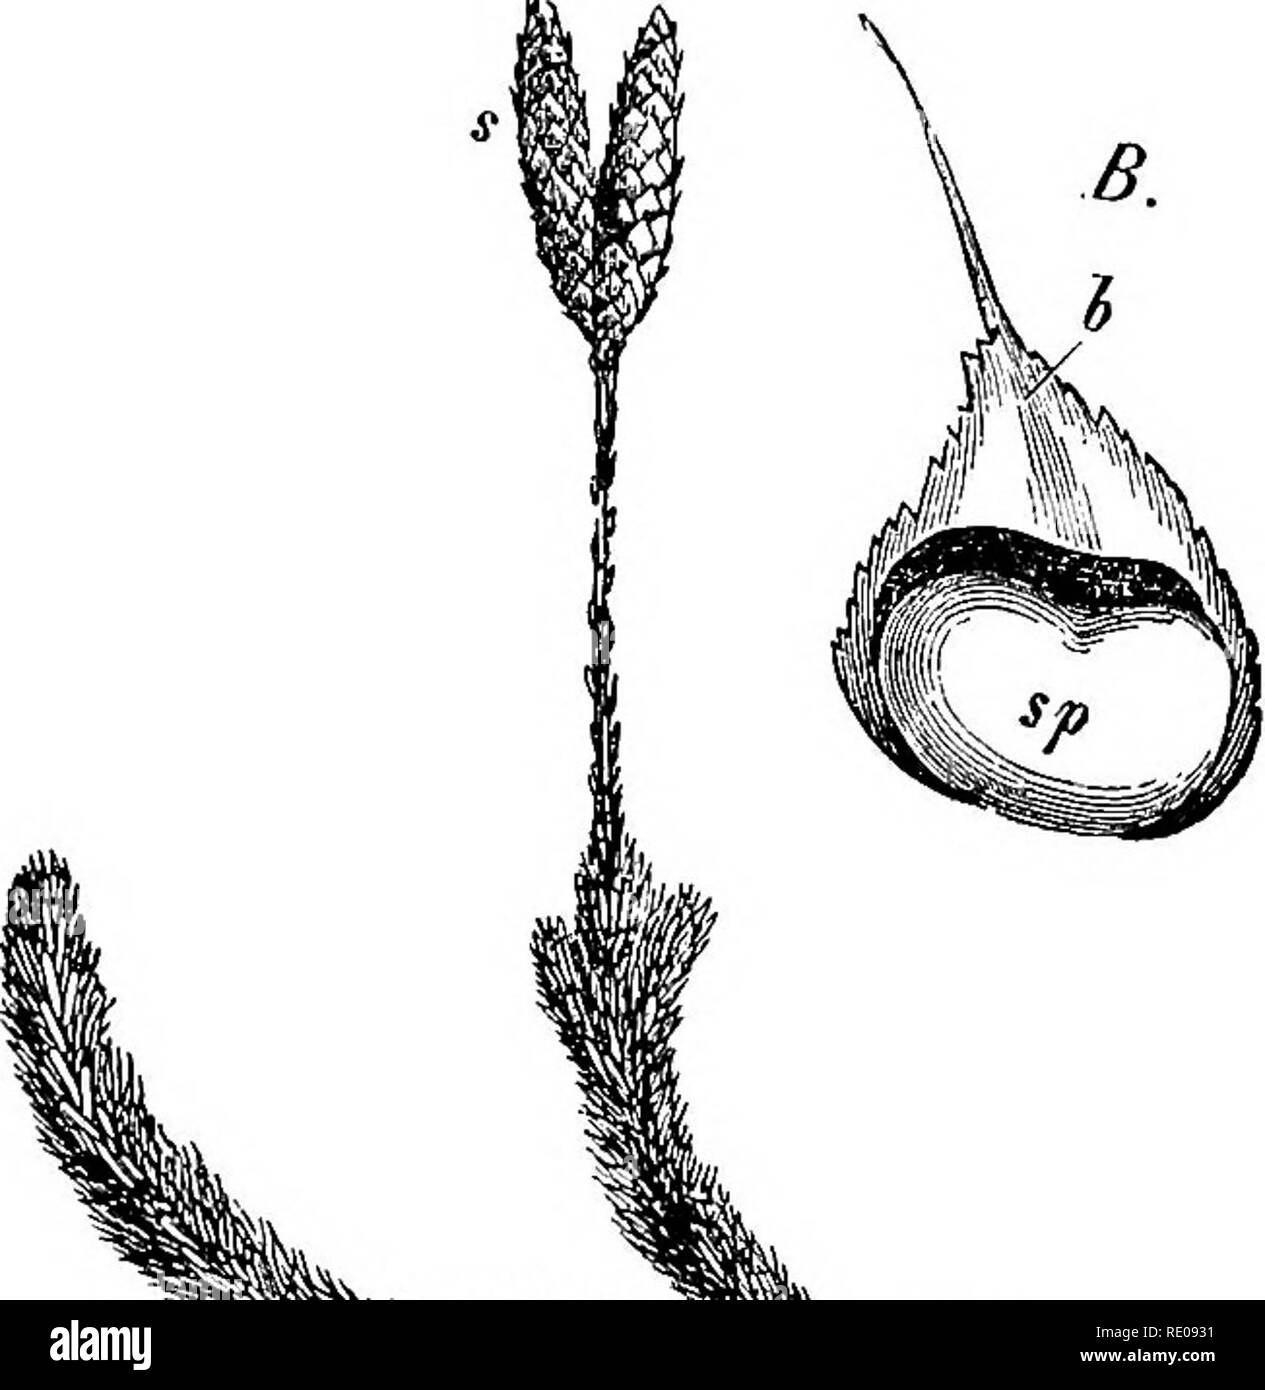 . A manual of structural botany; an introductory textbook for students of science and pharmacy. Plant morphology. Fig. 597 The male organ, antheridium of mosses (Funaria): A, antheridium, with escaping antherozoids (a); B, a single male element b, in mother cell; C, free, with two cilia. ^^i^sj?^-;^;^^-^, Fig. 598. Lycopodium: S, the cone-like spore- bearing leaves; B, an enlarged sporophyll leaf; b, the blade, and sp, the sporangium which con- tains the spores. the center of the capsule the Pedicel is continued as the Columella, and at its summit it is closed in until mature by one or more co Stock Photo